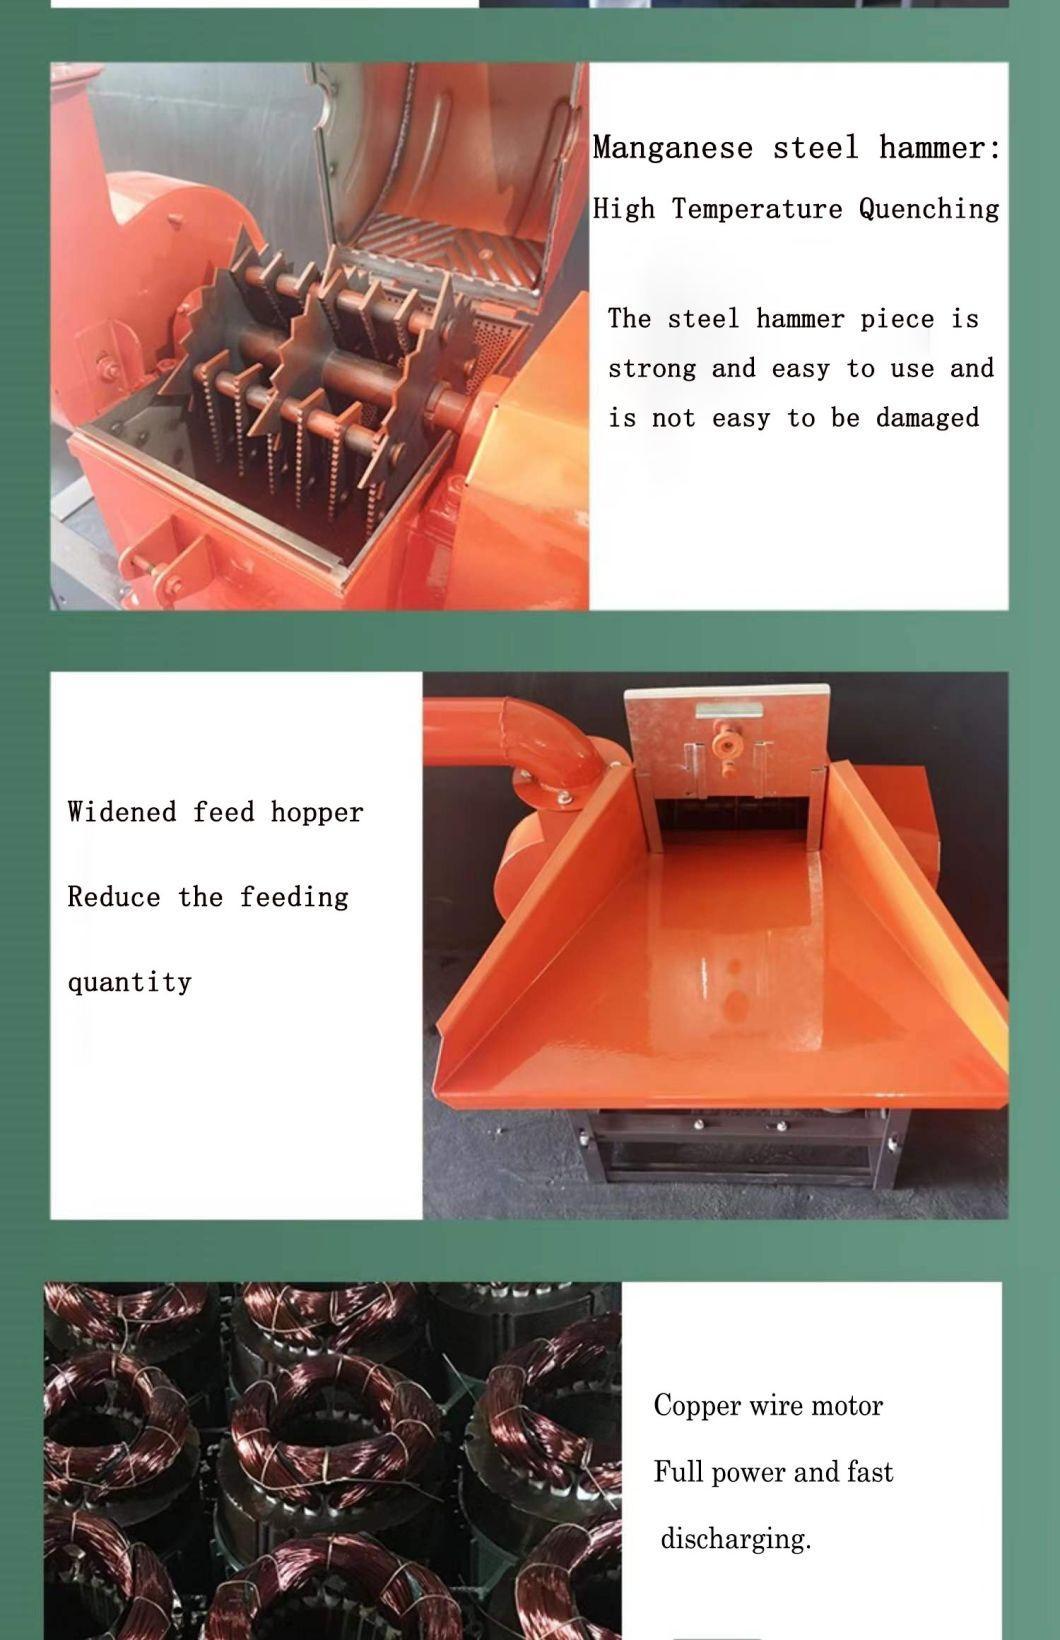 Industrial Automatic Mill Grinder Chili Pulverizer Spice Powder Grinding Machine Chinese Medicinal Dry Herbs Grinding